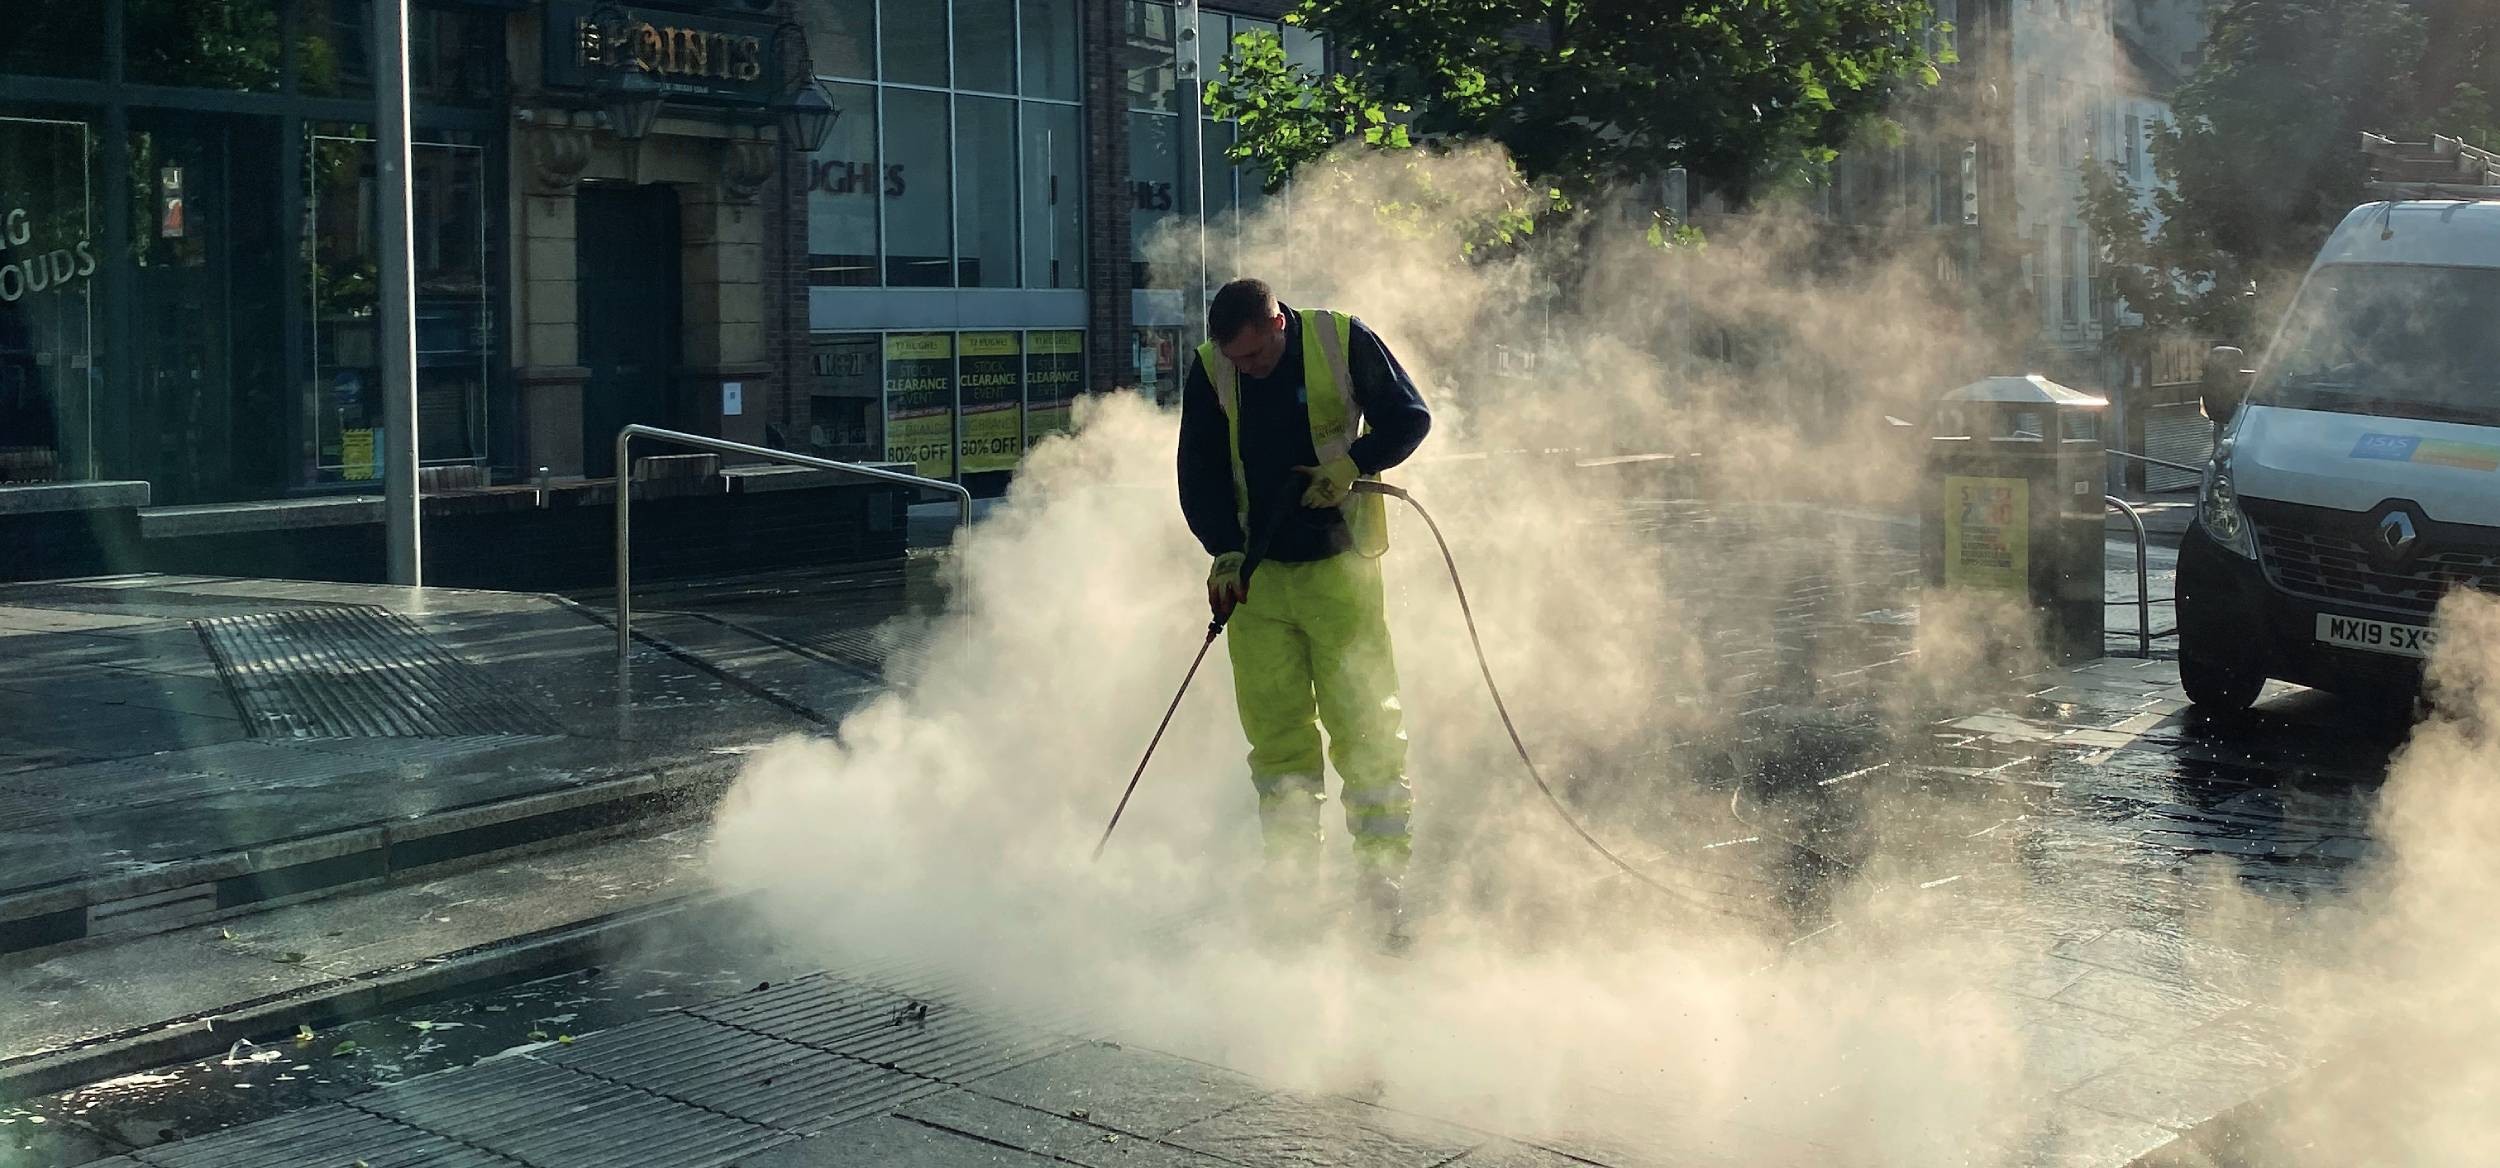 A member of the NE1 Clean Team jetwashing